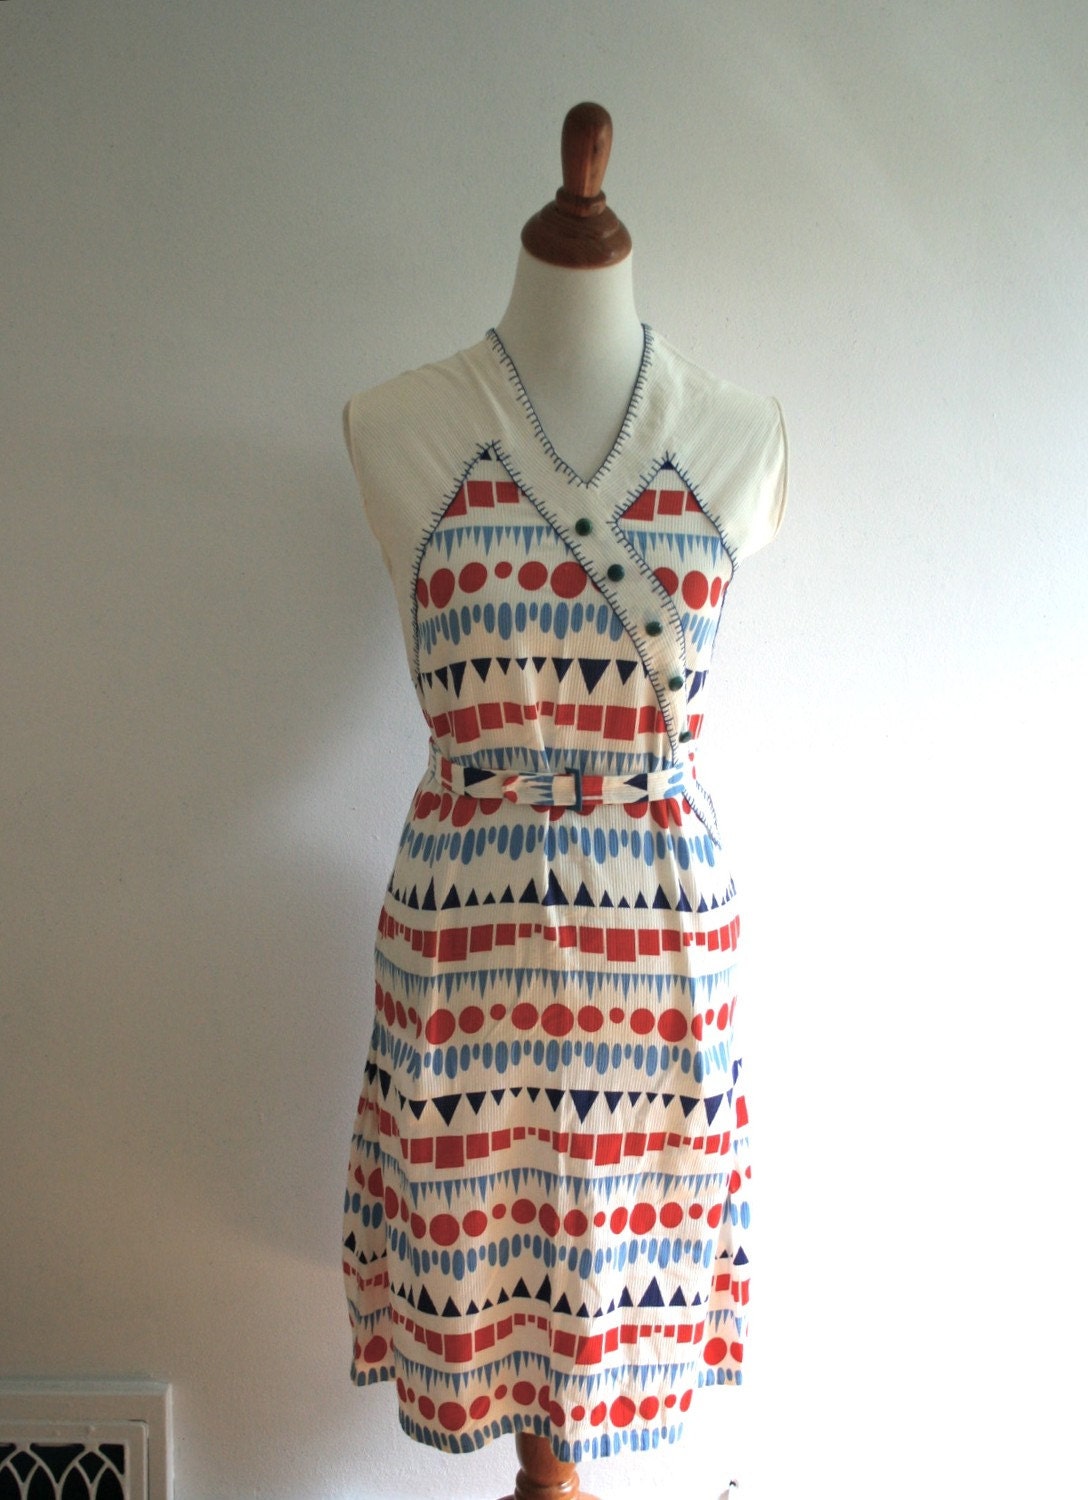 1930s Darling Deco Dustbowl Flour Sack Dress by adelinesattic